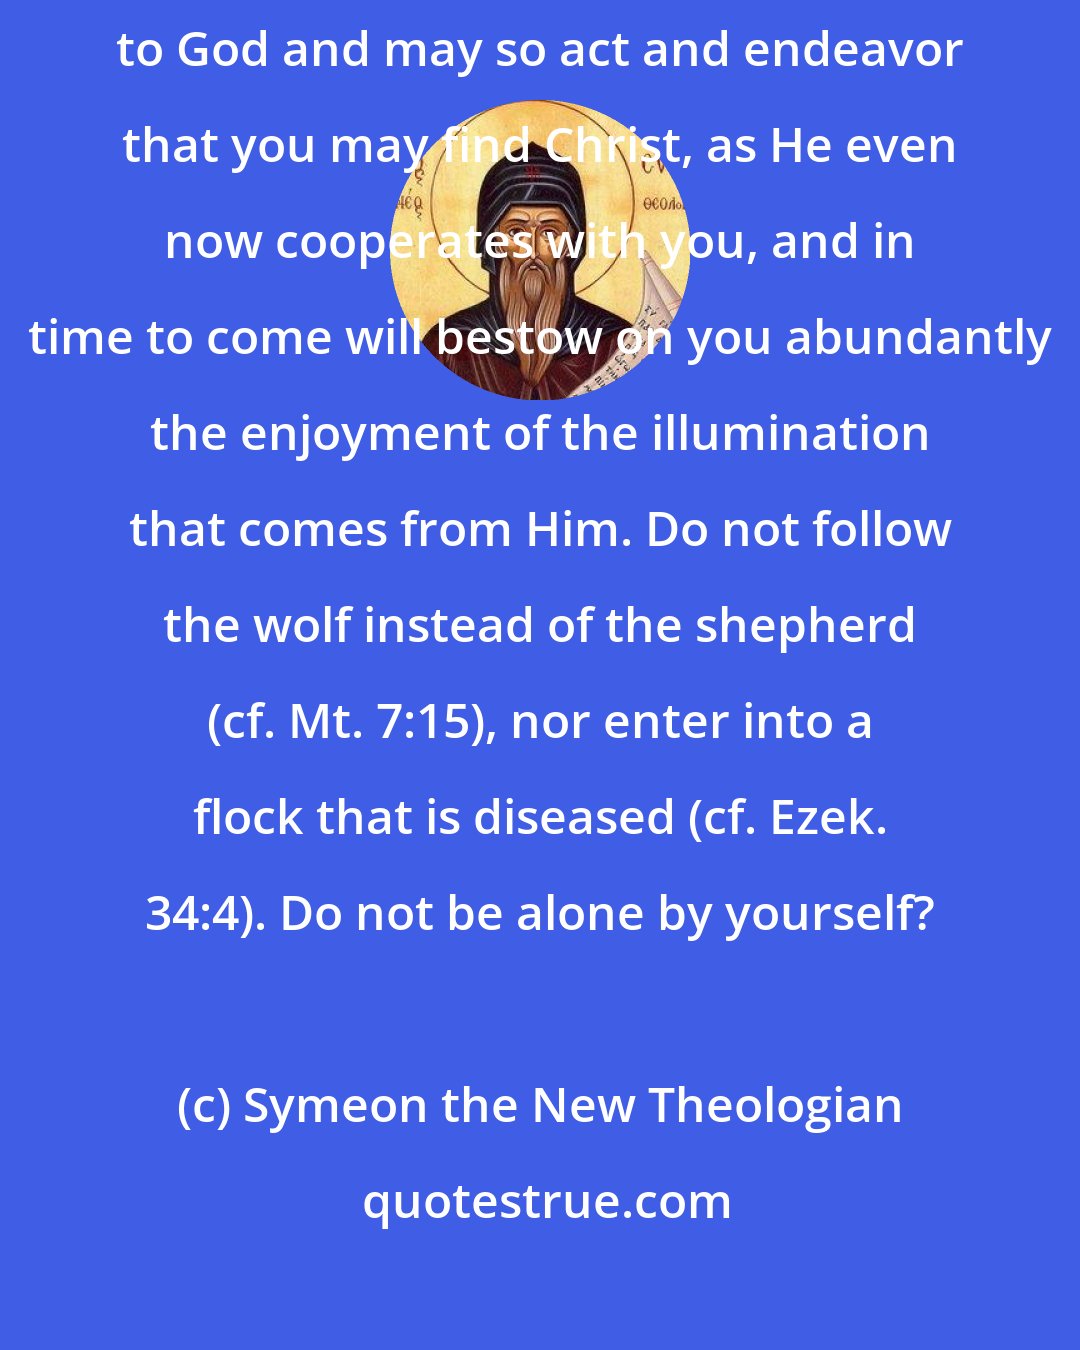 Symeon the New Theologian: ... I pray... that you may discern your affairs in a manner pleasing to God and may so act and endeavor that you may find Christ, as He even now cooperates with you, and in time to come will bestow on you abundantly the enjoyment of the illumination that comes from Him. Do not follow the wolf instead of the shepherd (cf. Mt. 7:15), nor enter into a flock that is diseased (cf. Ezek. 34:4). Do not be alone by yourself?